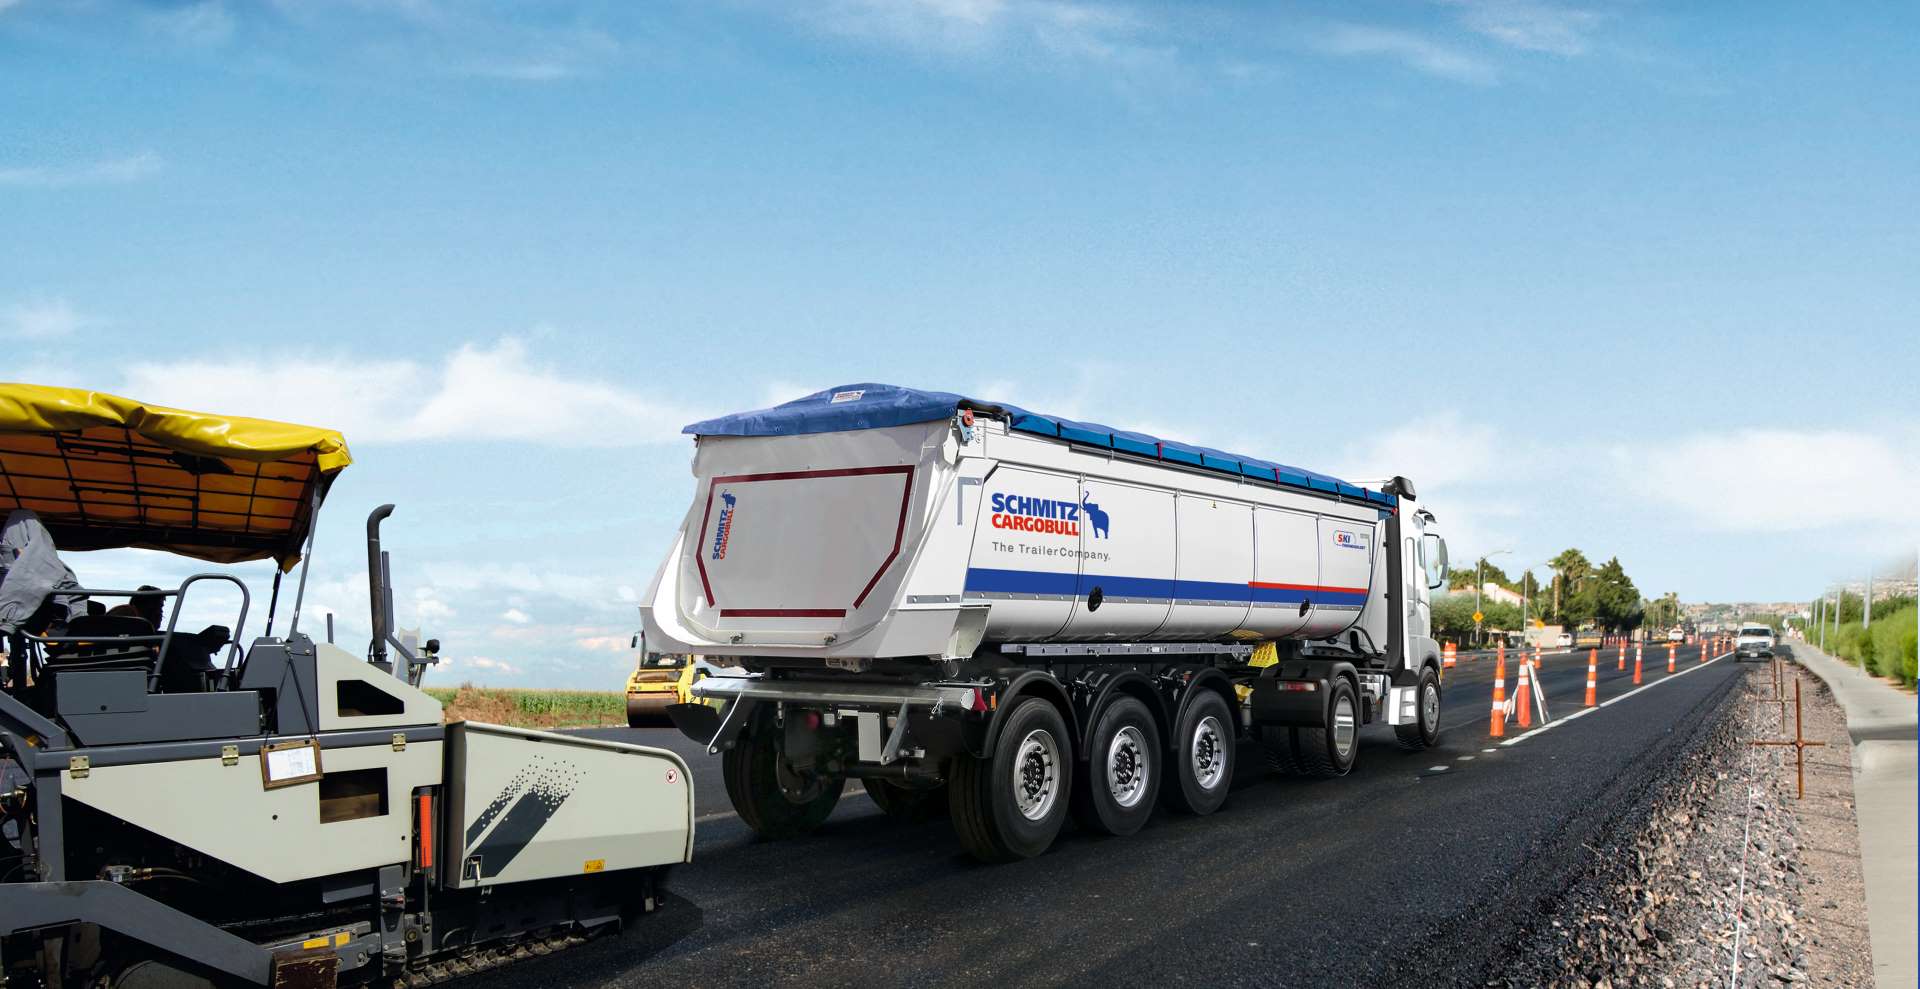 The S.KI SOLID tipper semi-trailer with rounded steel body for the transport of construction materials